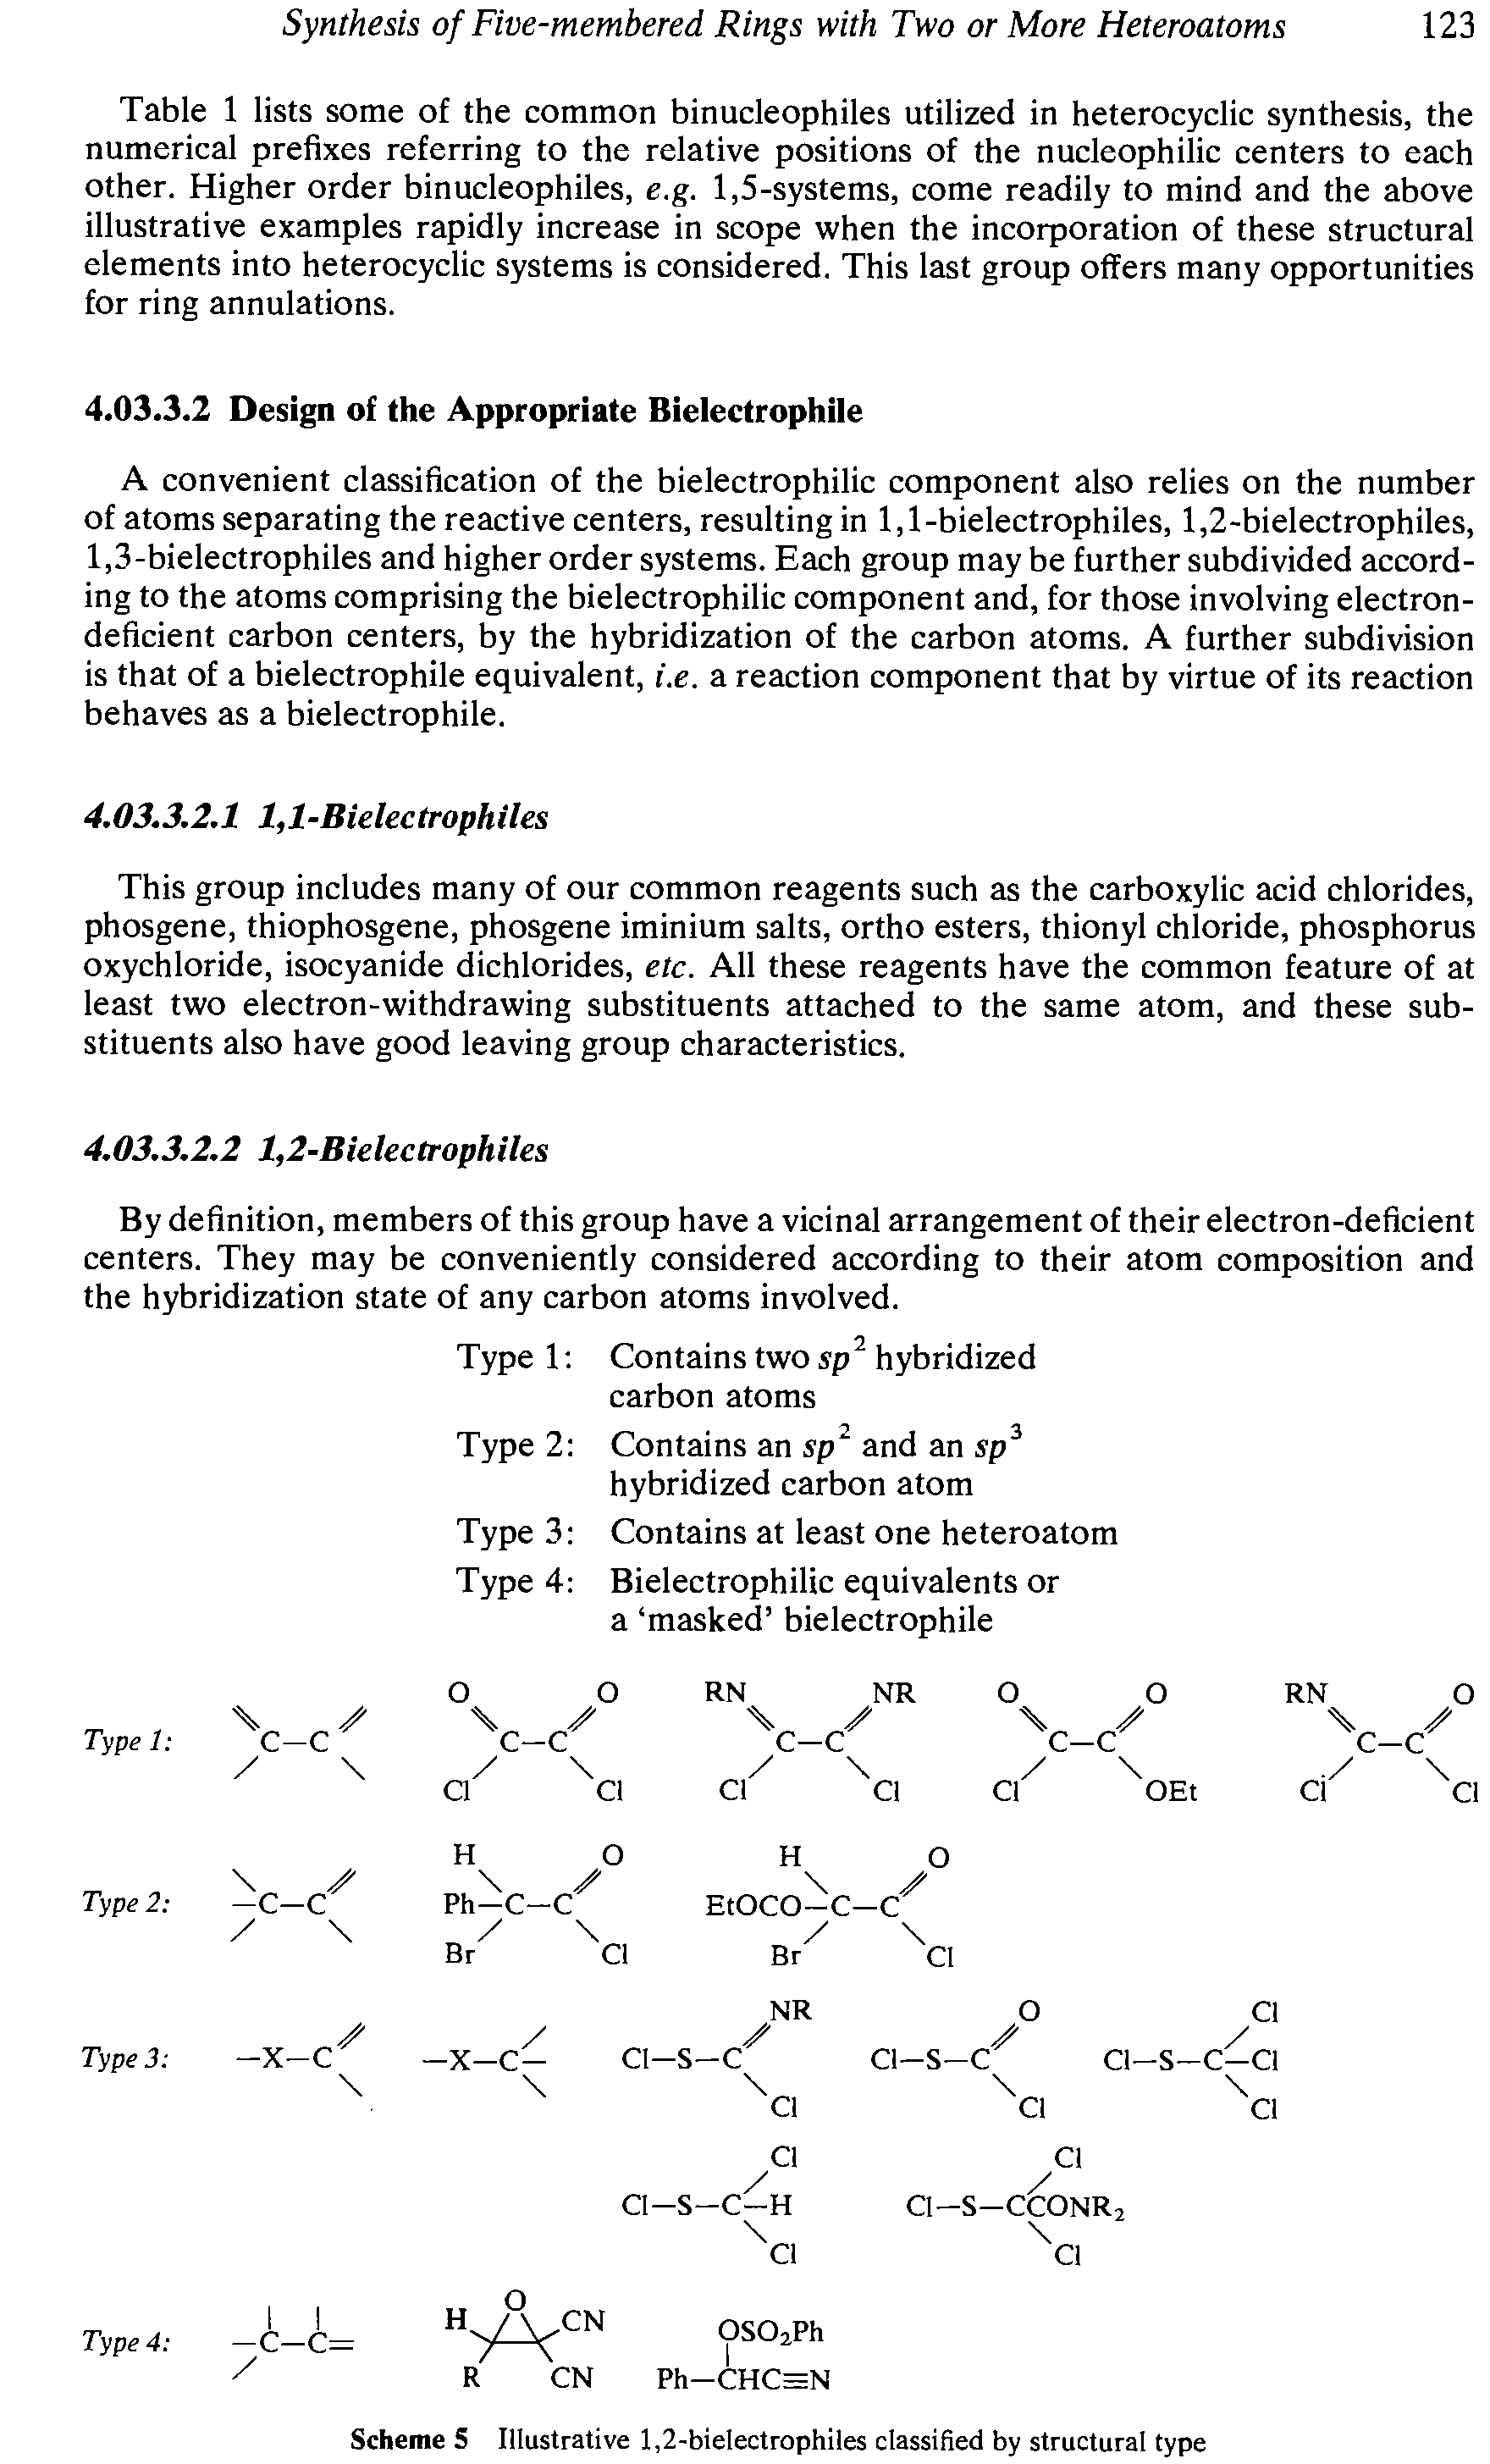 Scheme S Illustrative 1,2-bielectrophiles classified by structural type...